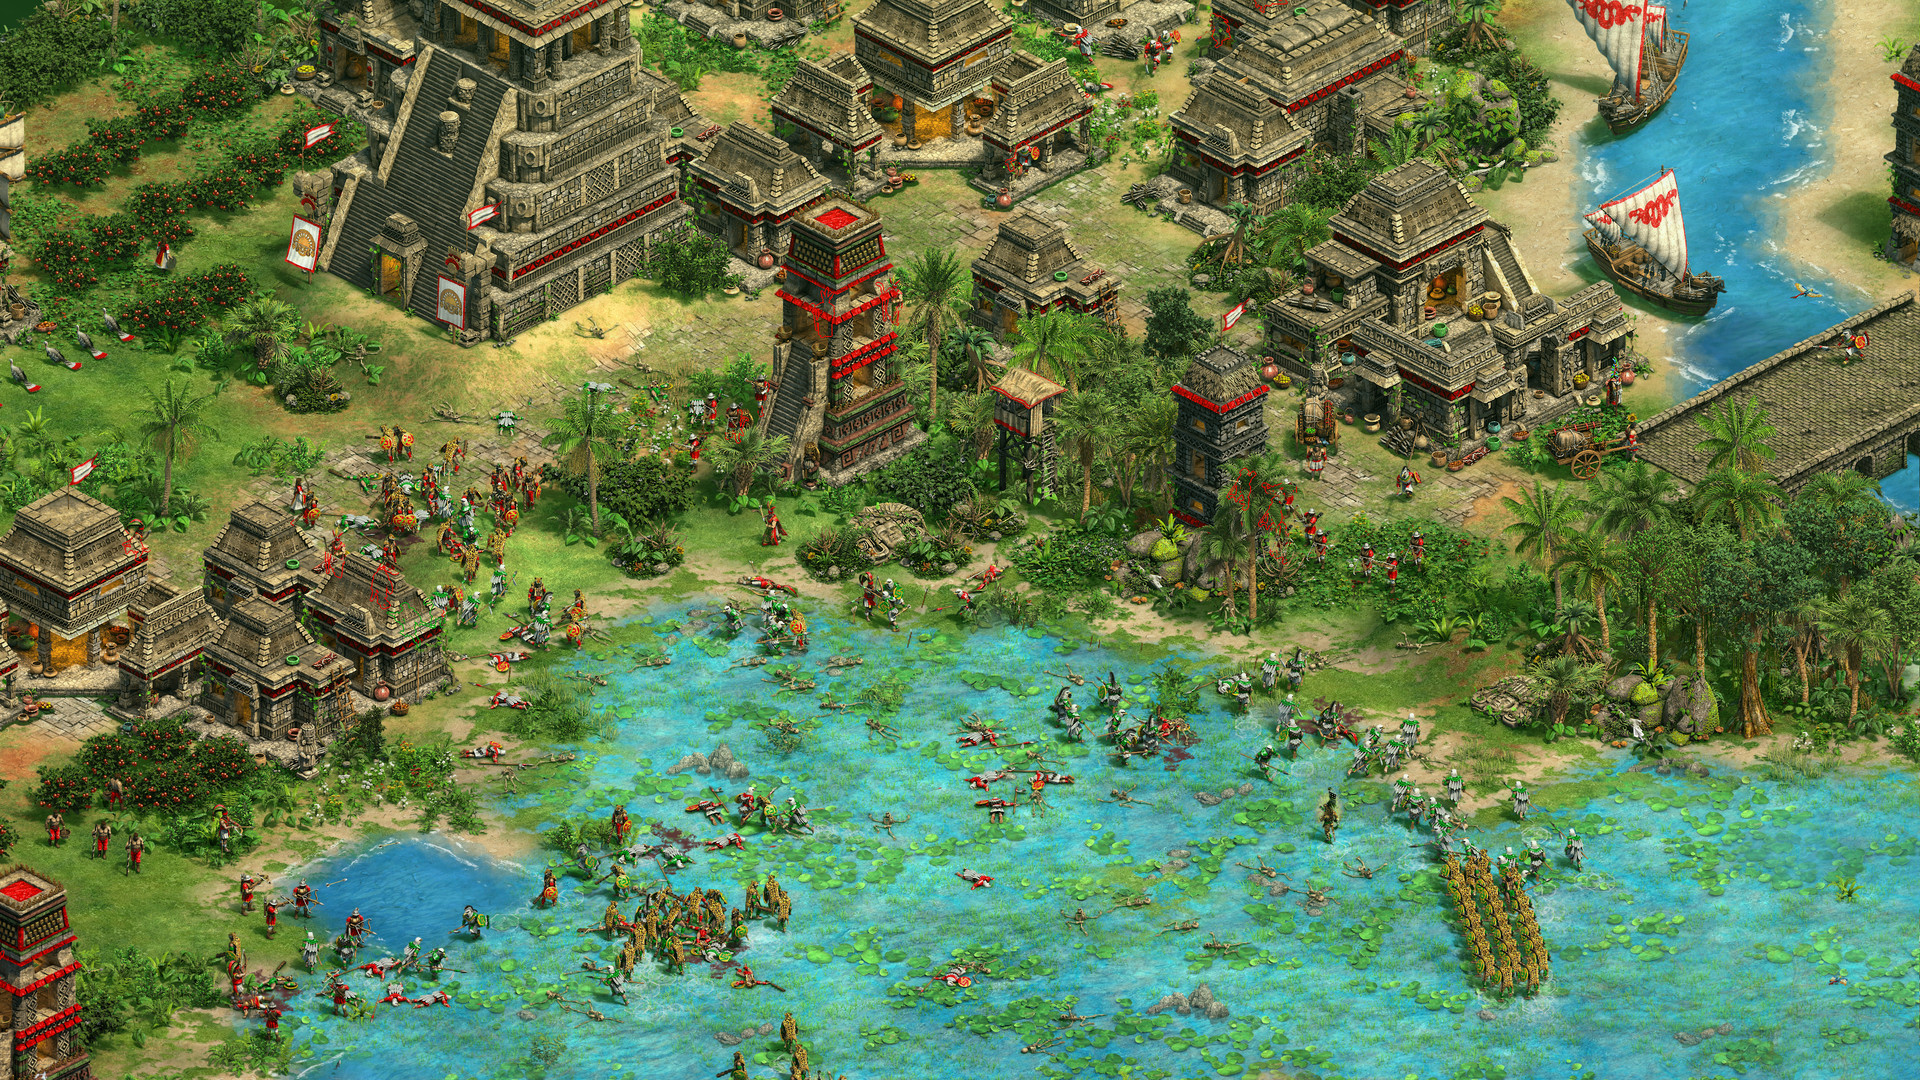 Age Of Empires II: Definitive Edition Wallpapers - Wallpaper Cave